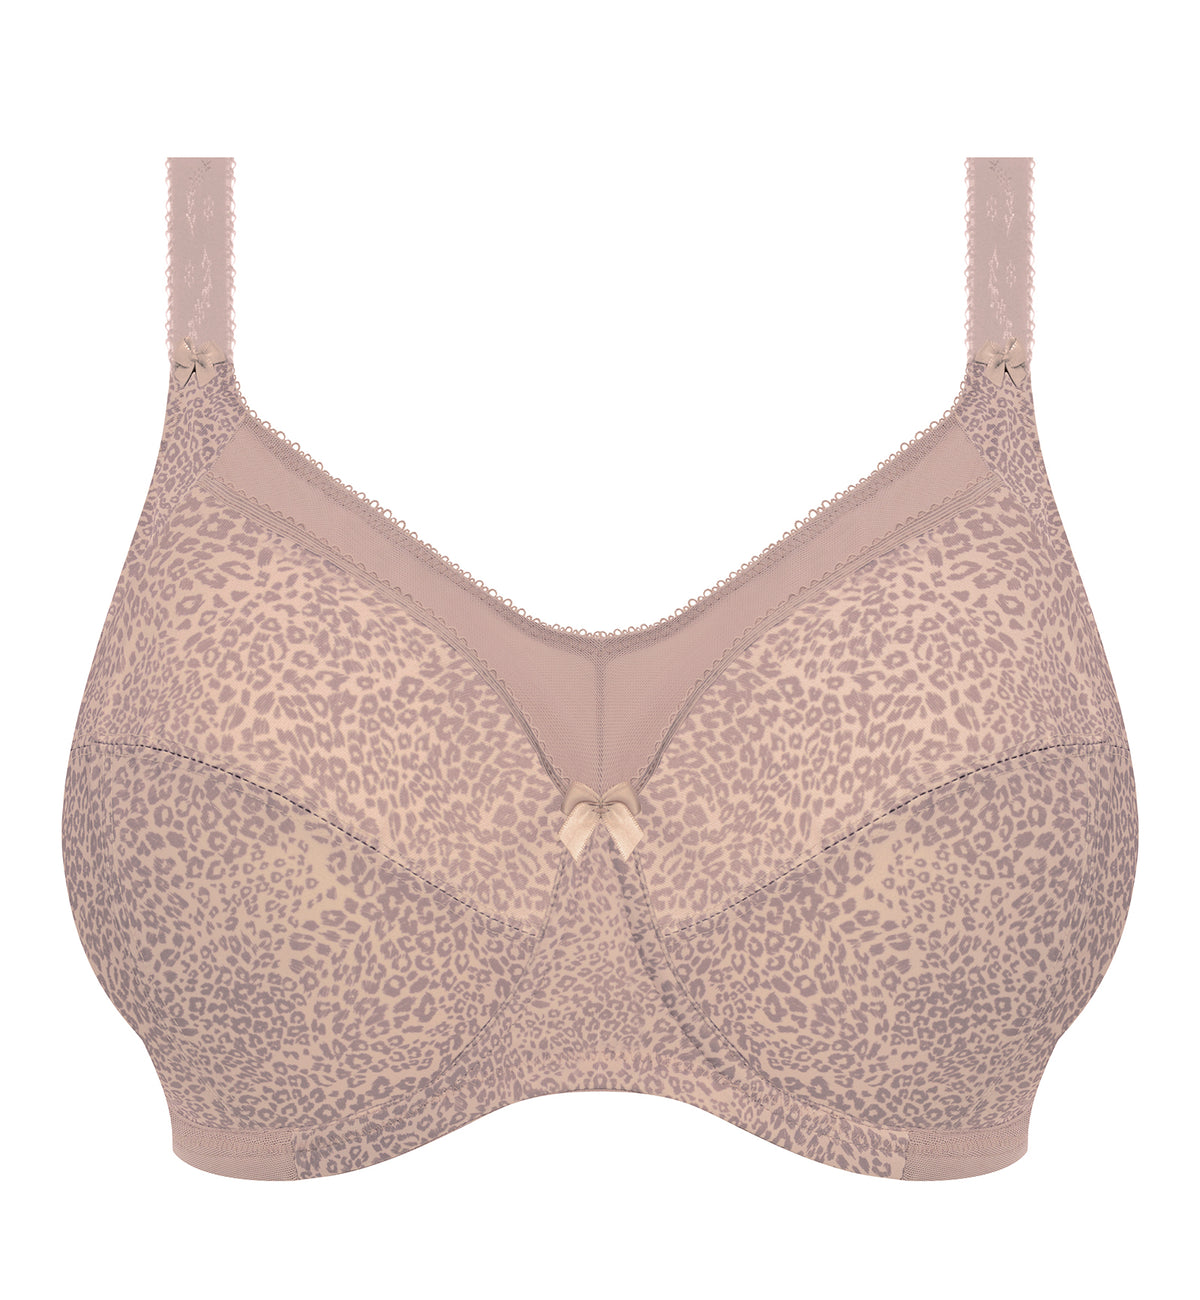 Goddess Kayla Banded Full Cup Underwire Bra (6164),34G,Taupe Leopard - Taupe Leopard,34G